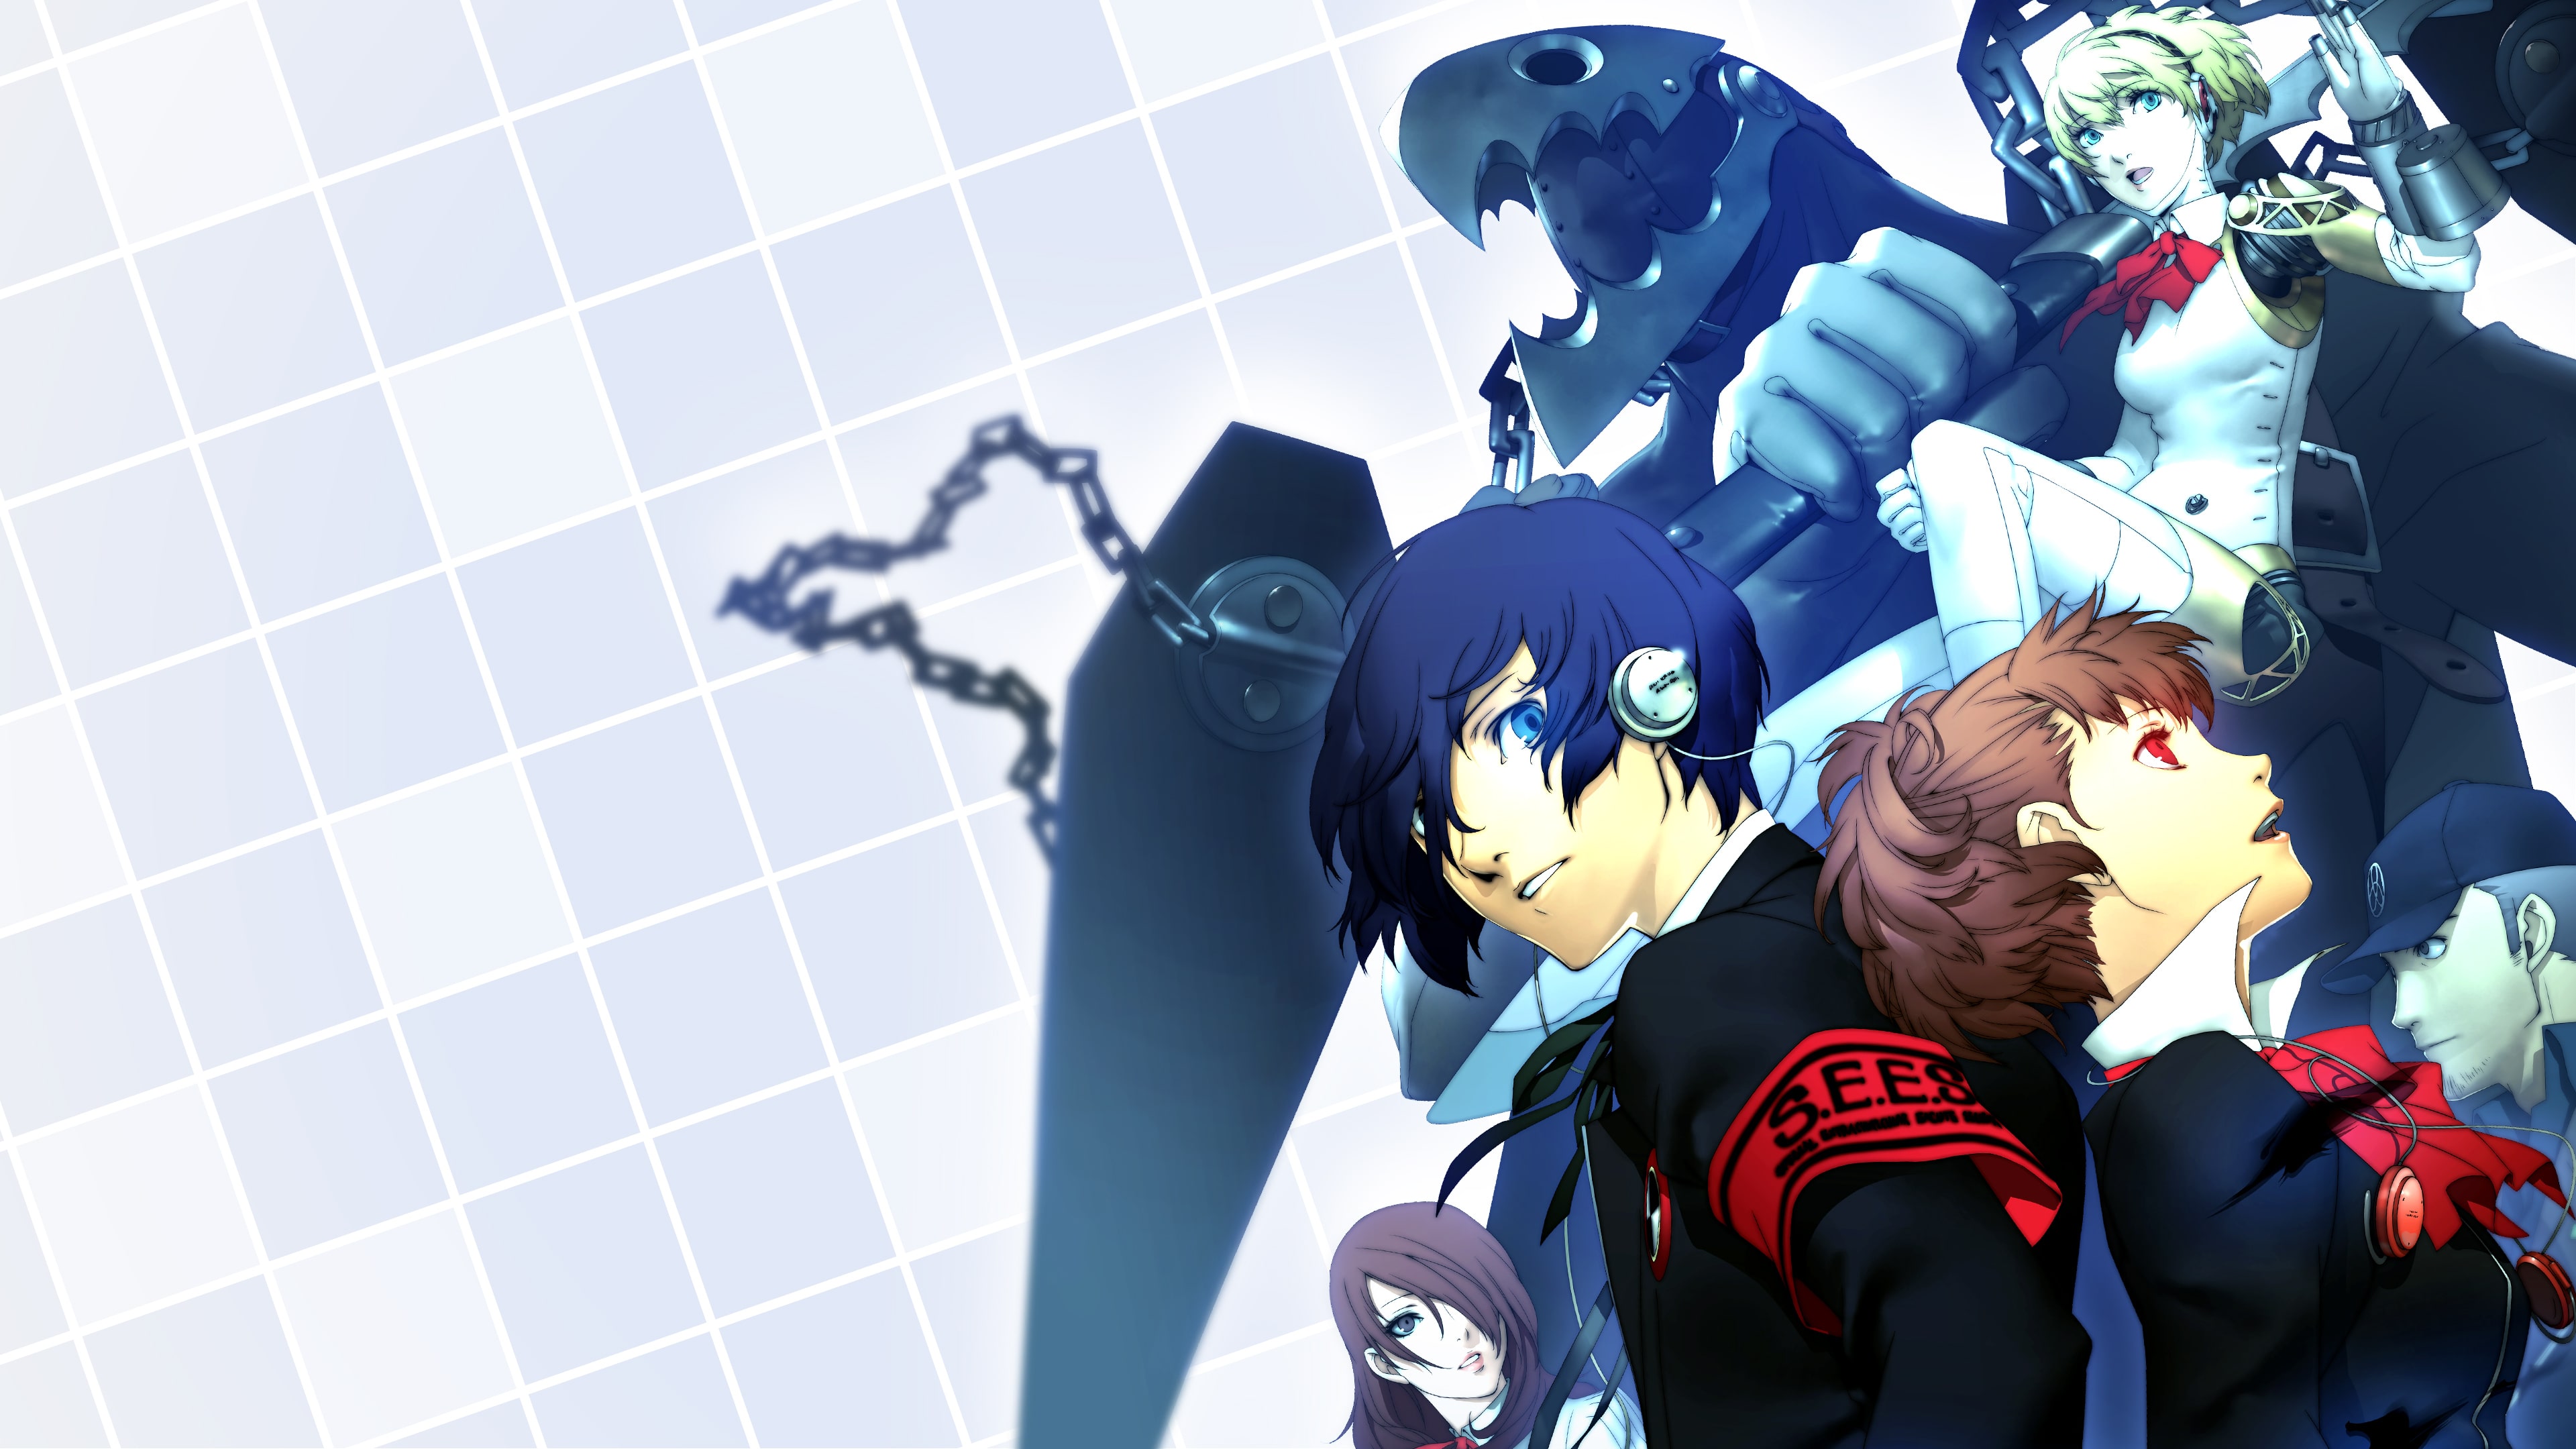 Persona 3 Portable (Simplified Chinese, English, Korean, Japanese, Traditional Chinese)